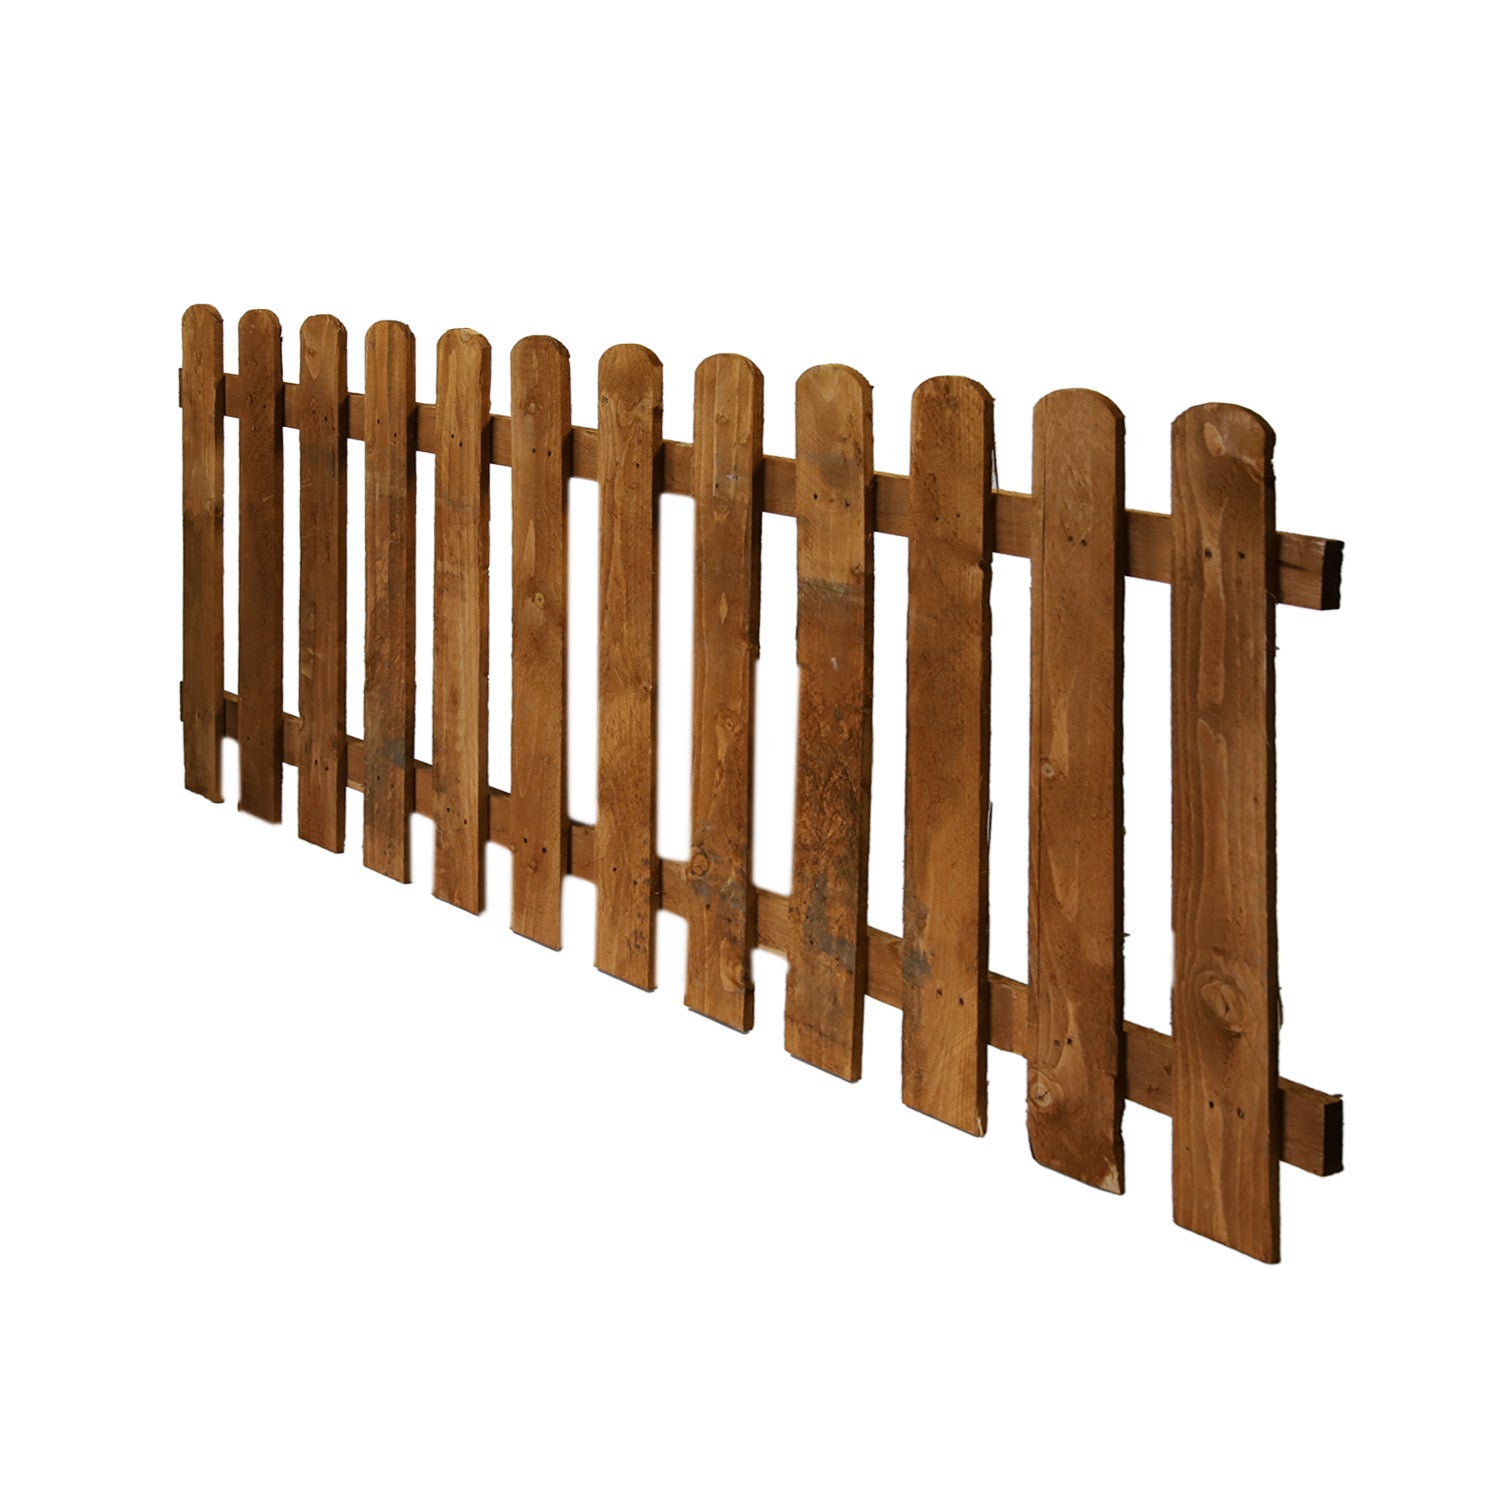 6' x 3' Wicket Fence Panel Round Top